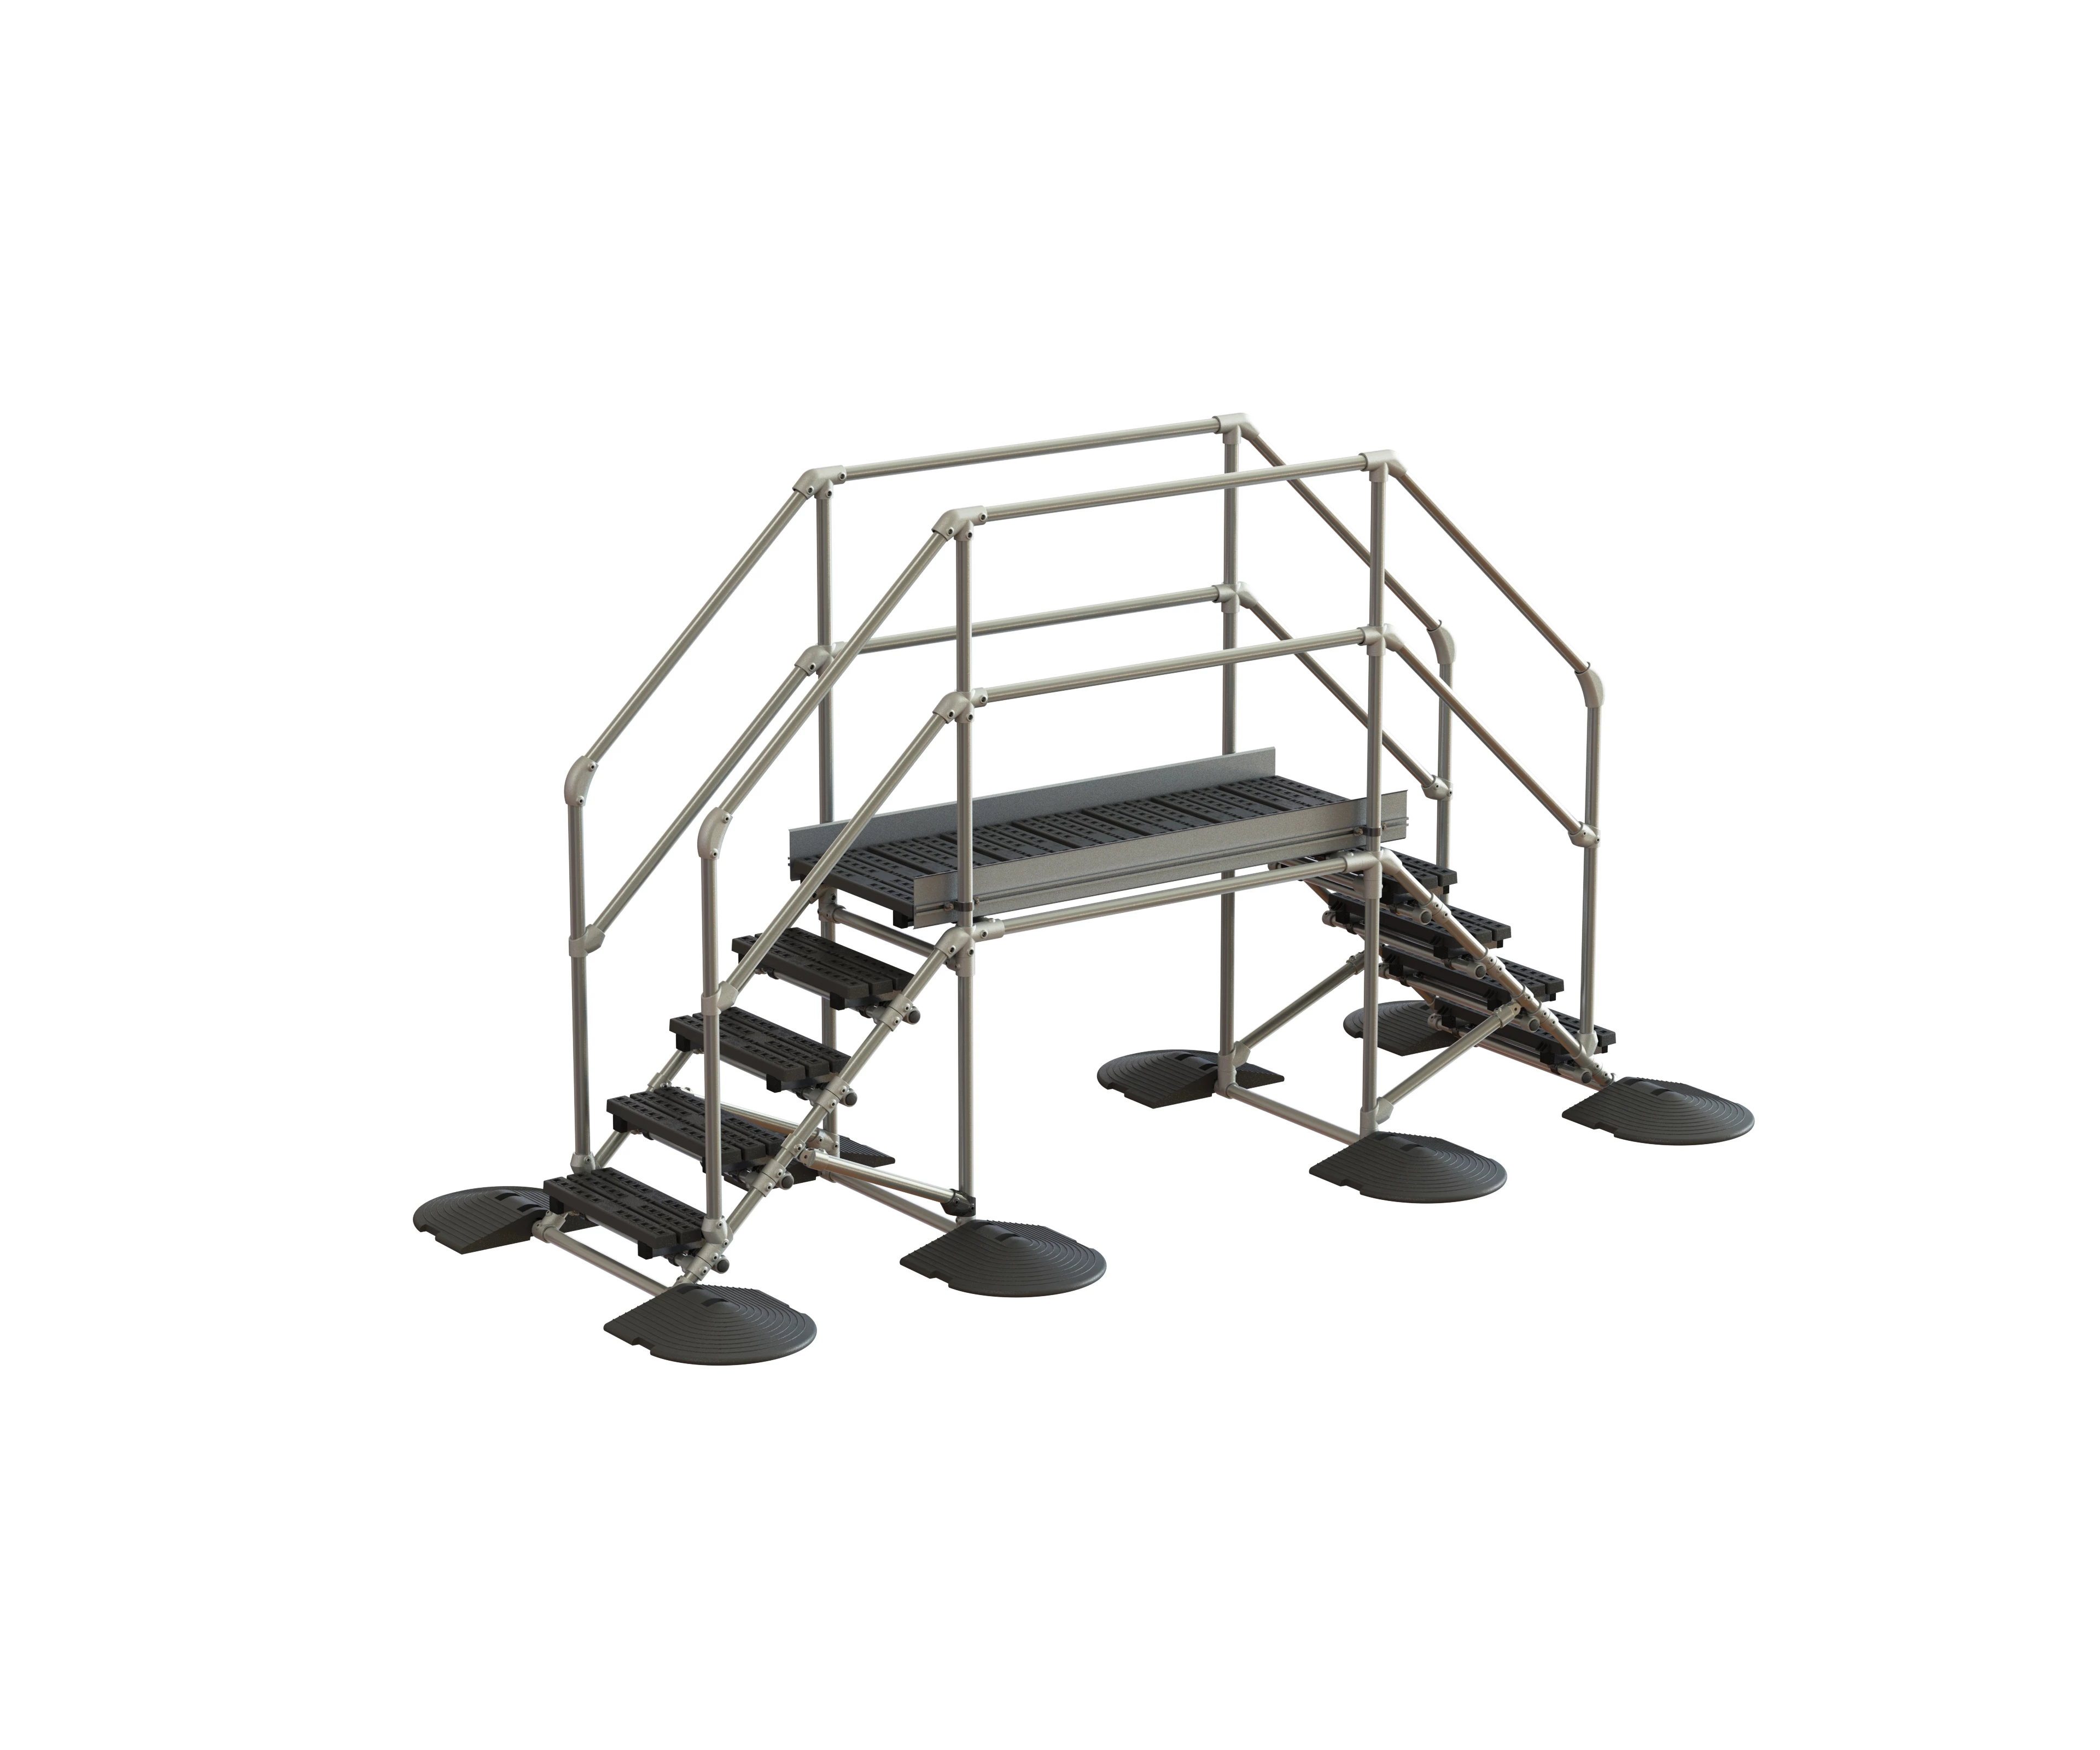 Suppliers of Fragile Roof Access Equipment